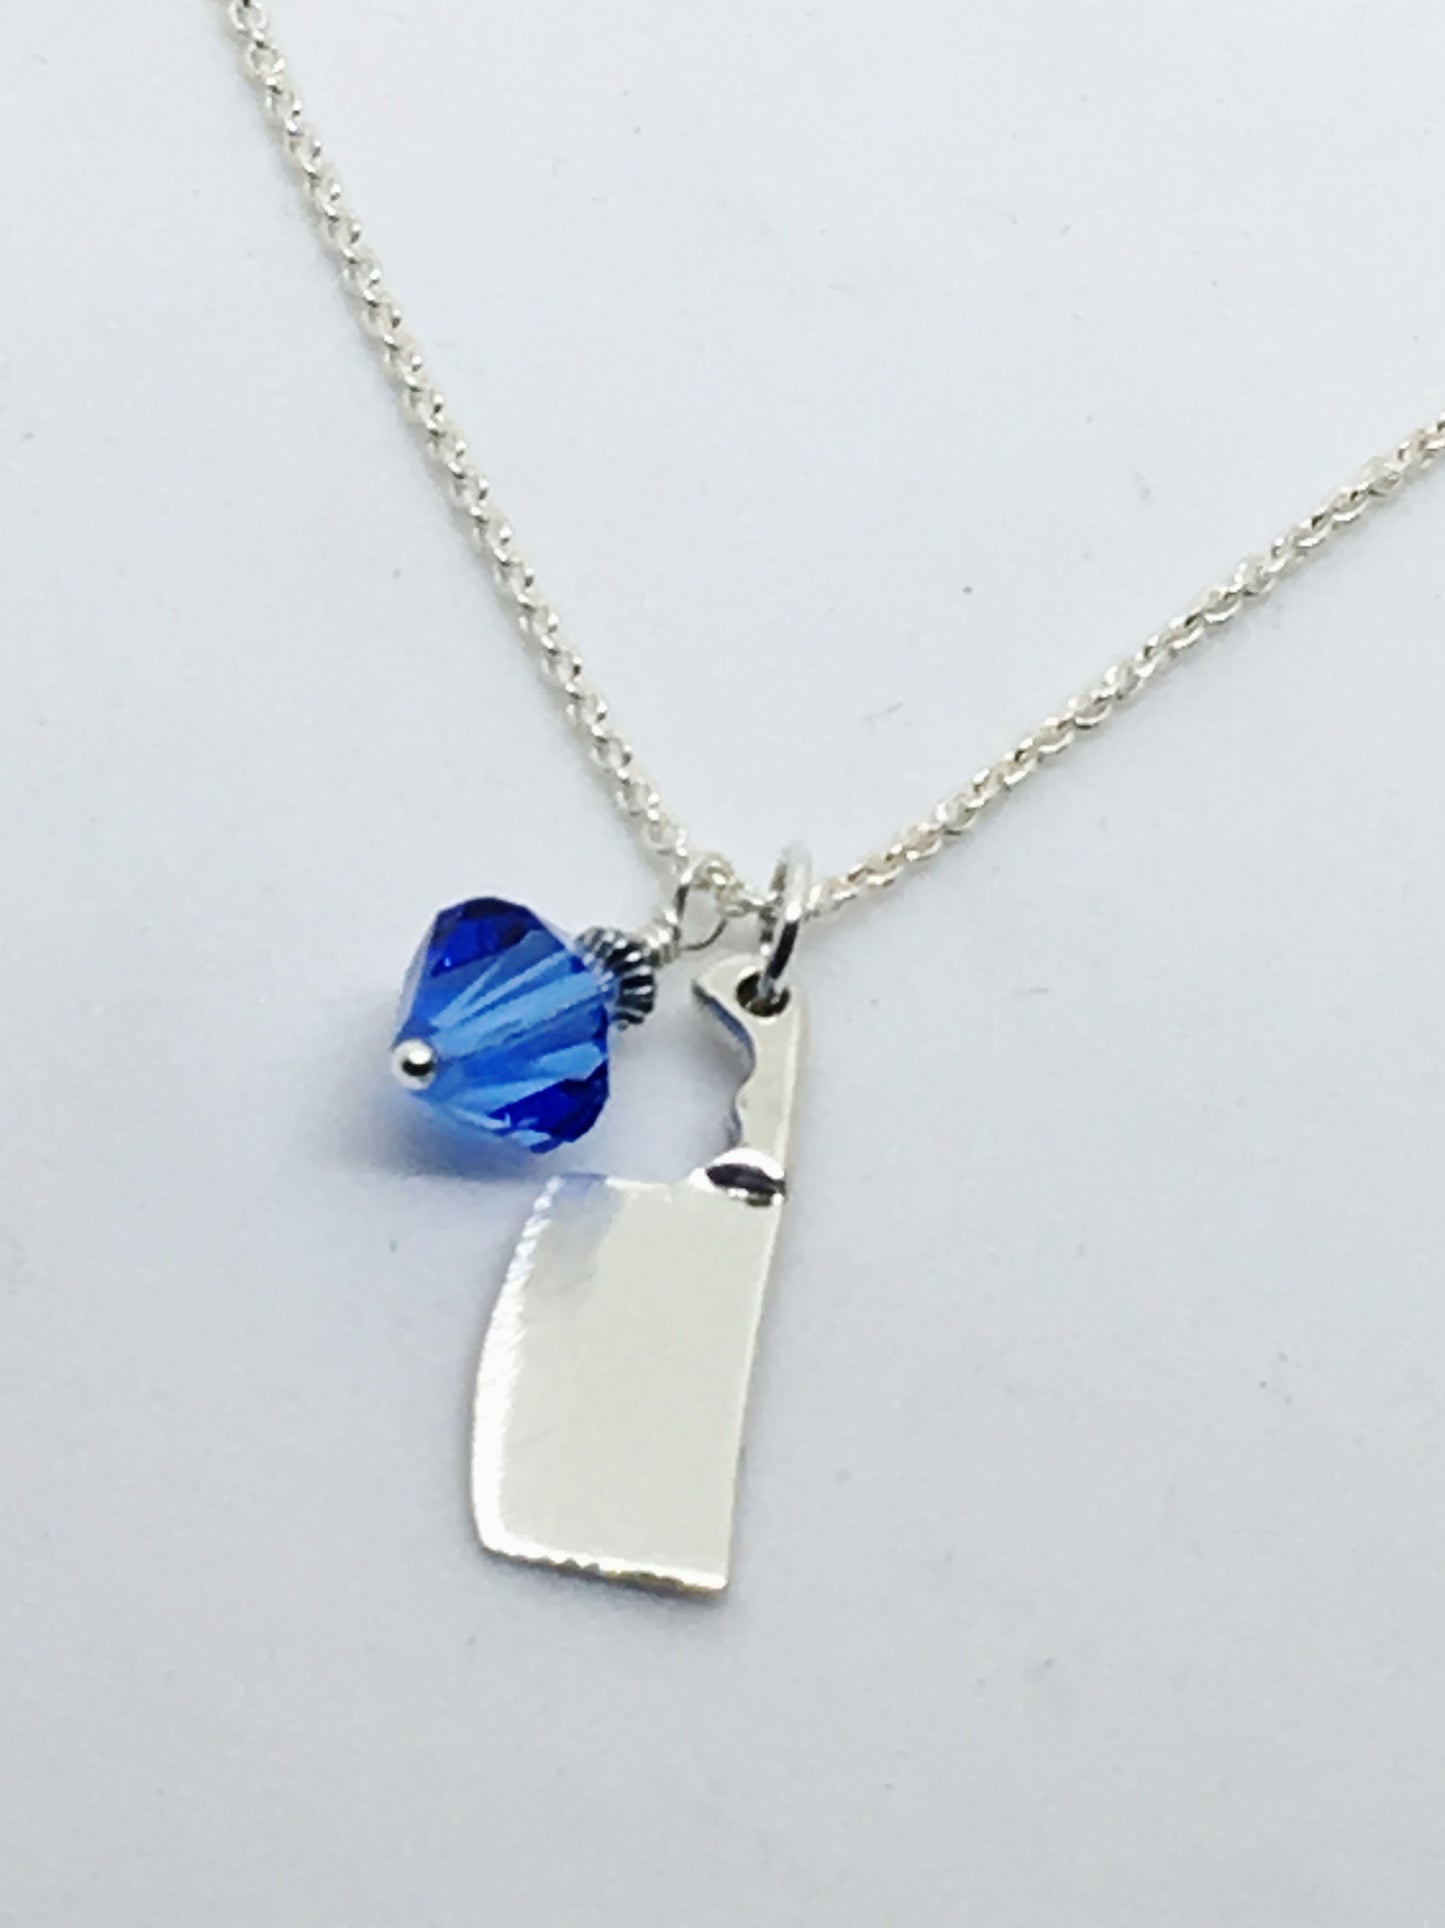 Chef's Cleaver Pendant Necklace with Blue Swarovski Crystal Charm